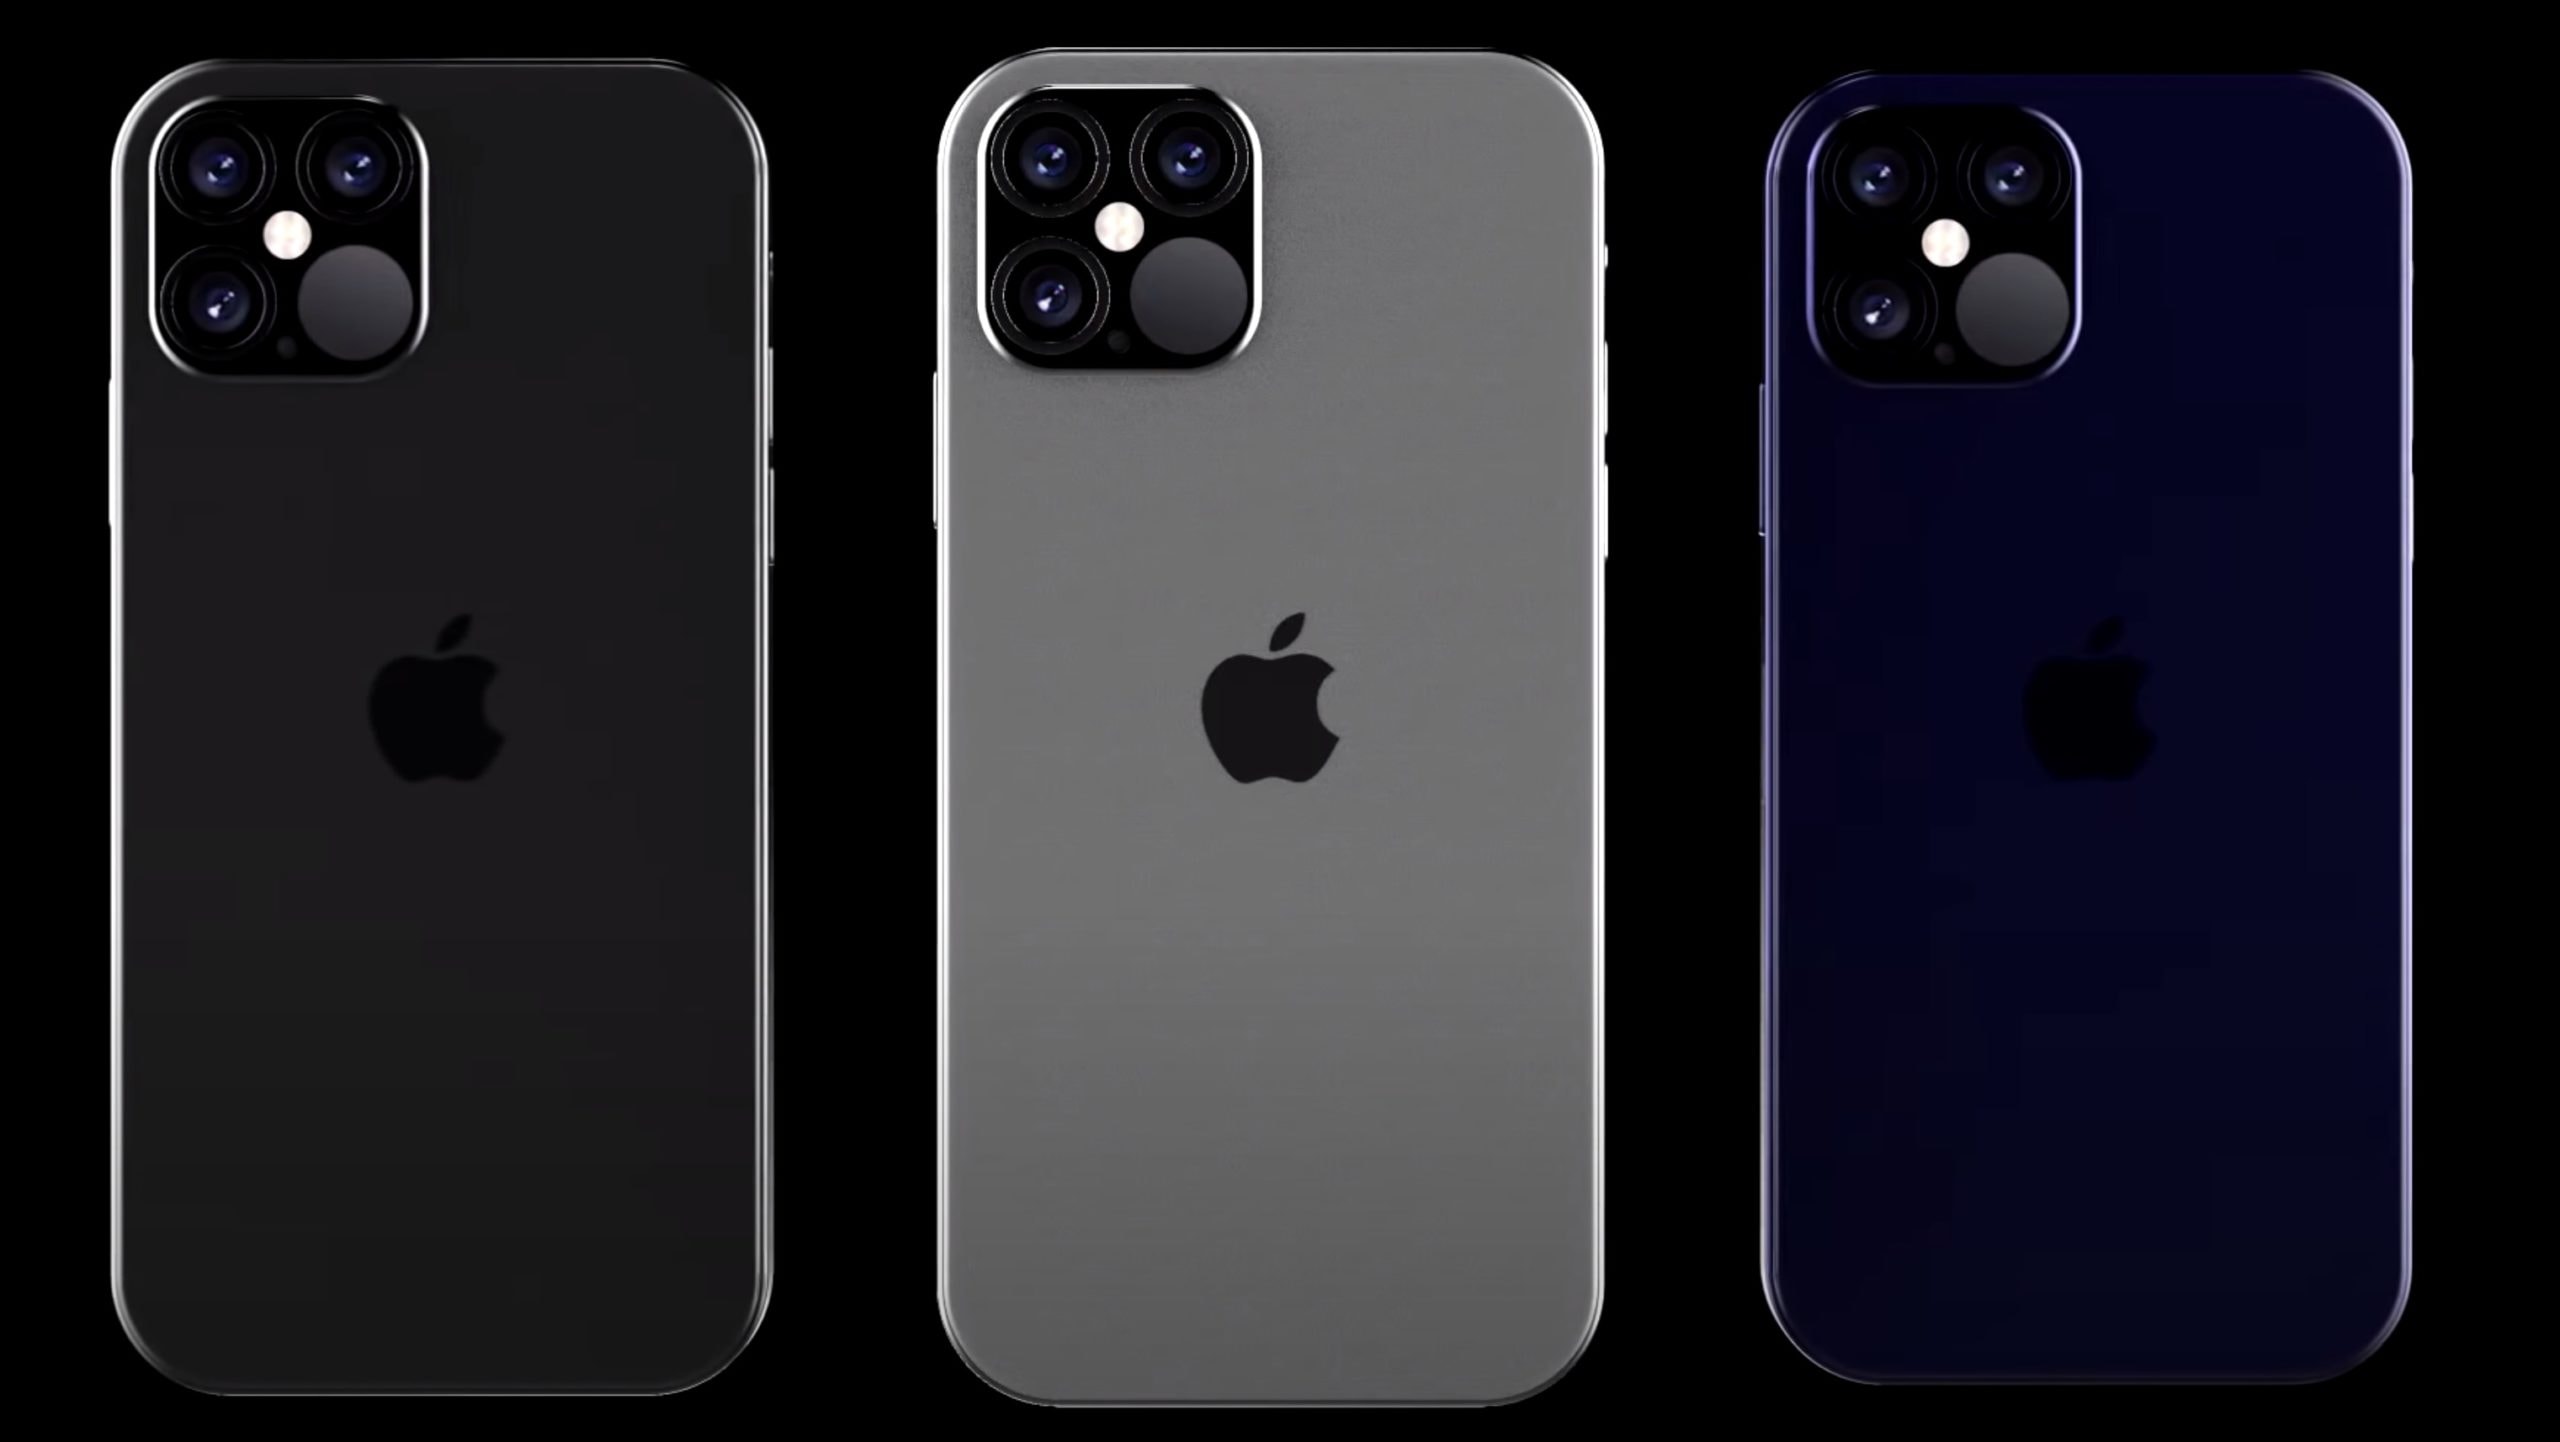 iPhone 12 Pro Max to Come with 5G Connectivity ...